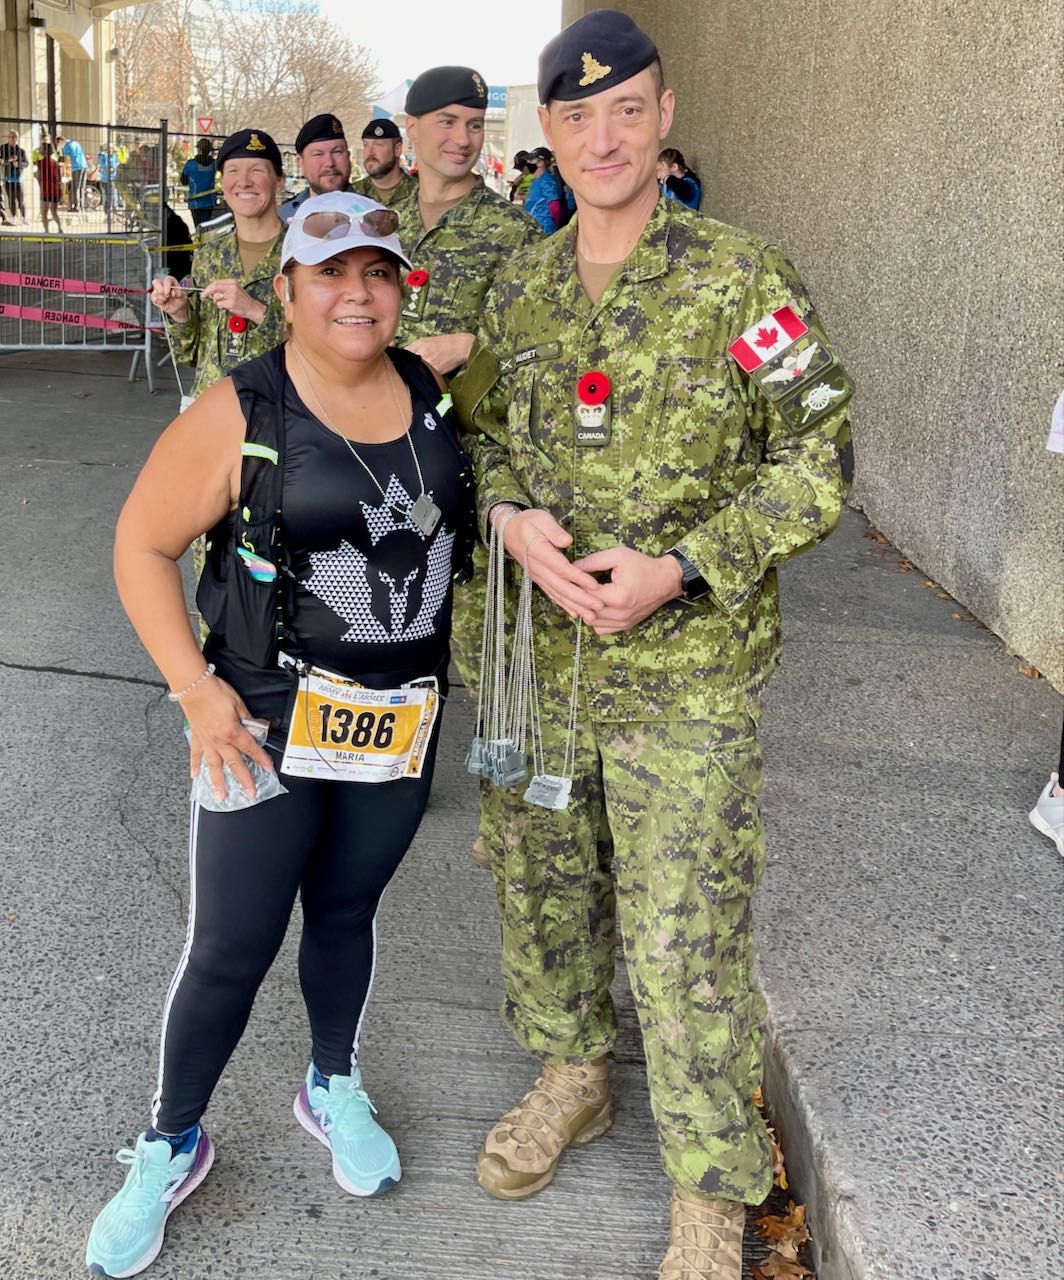 Carmen Receiving her medal at the end of the 10K Army Run